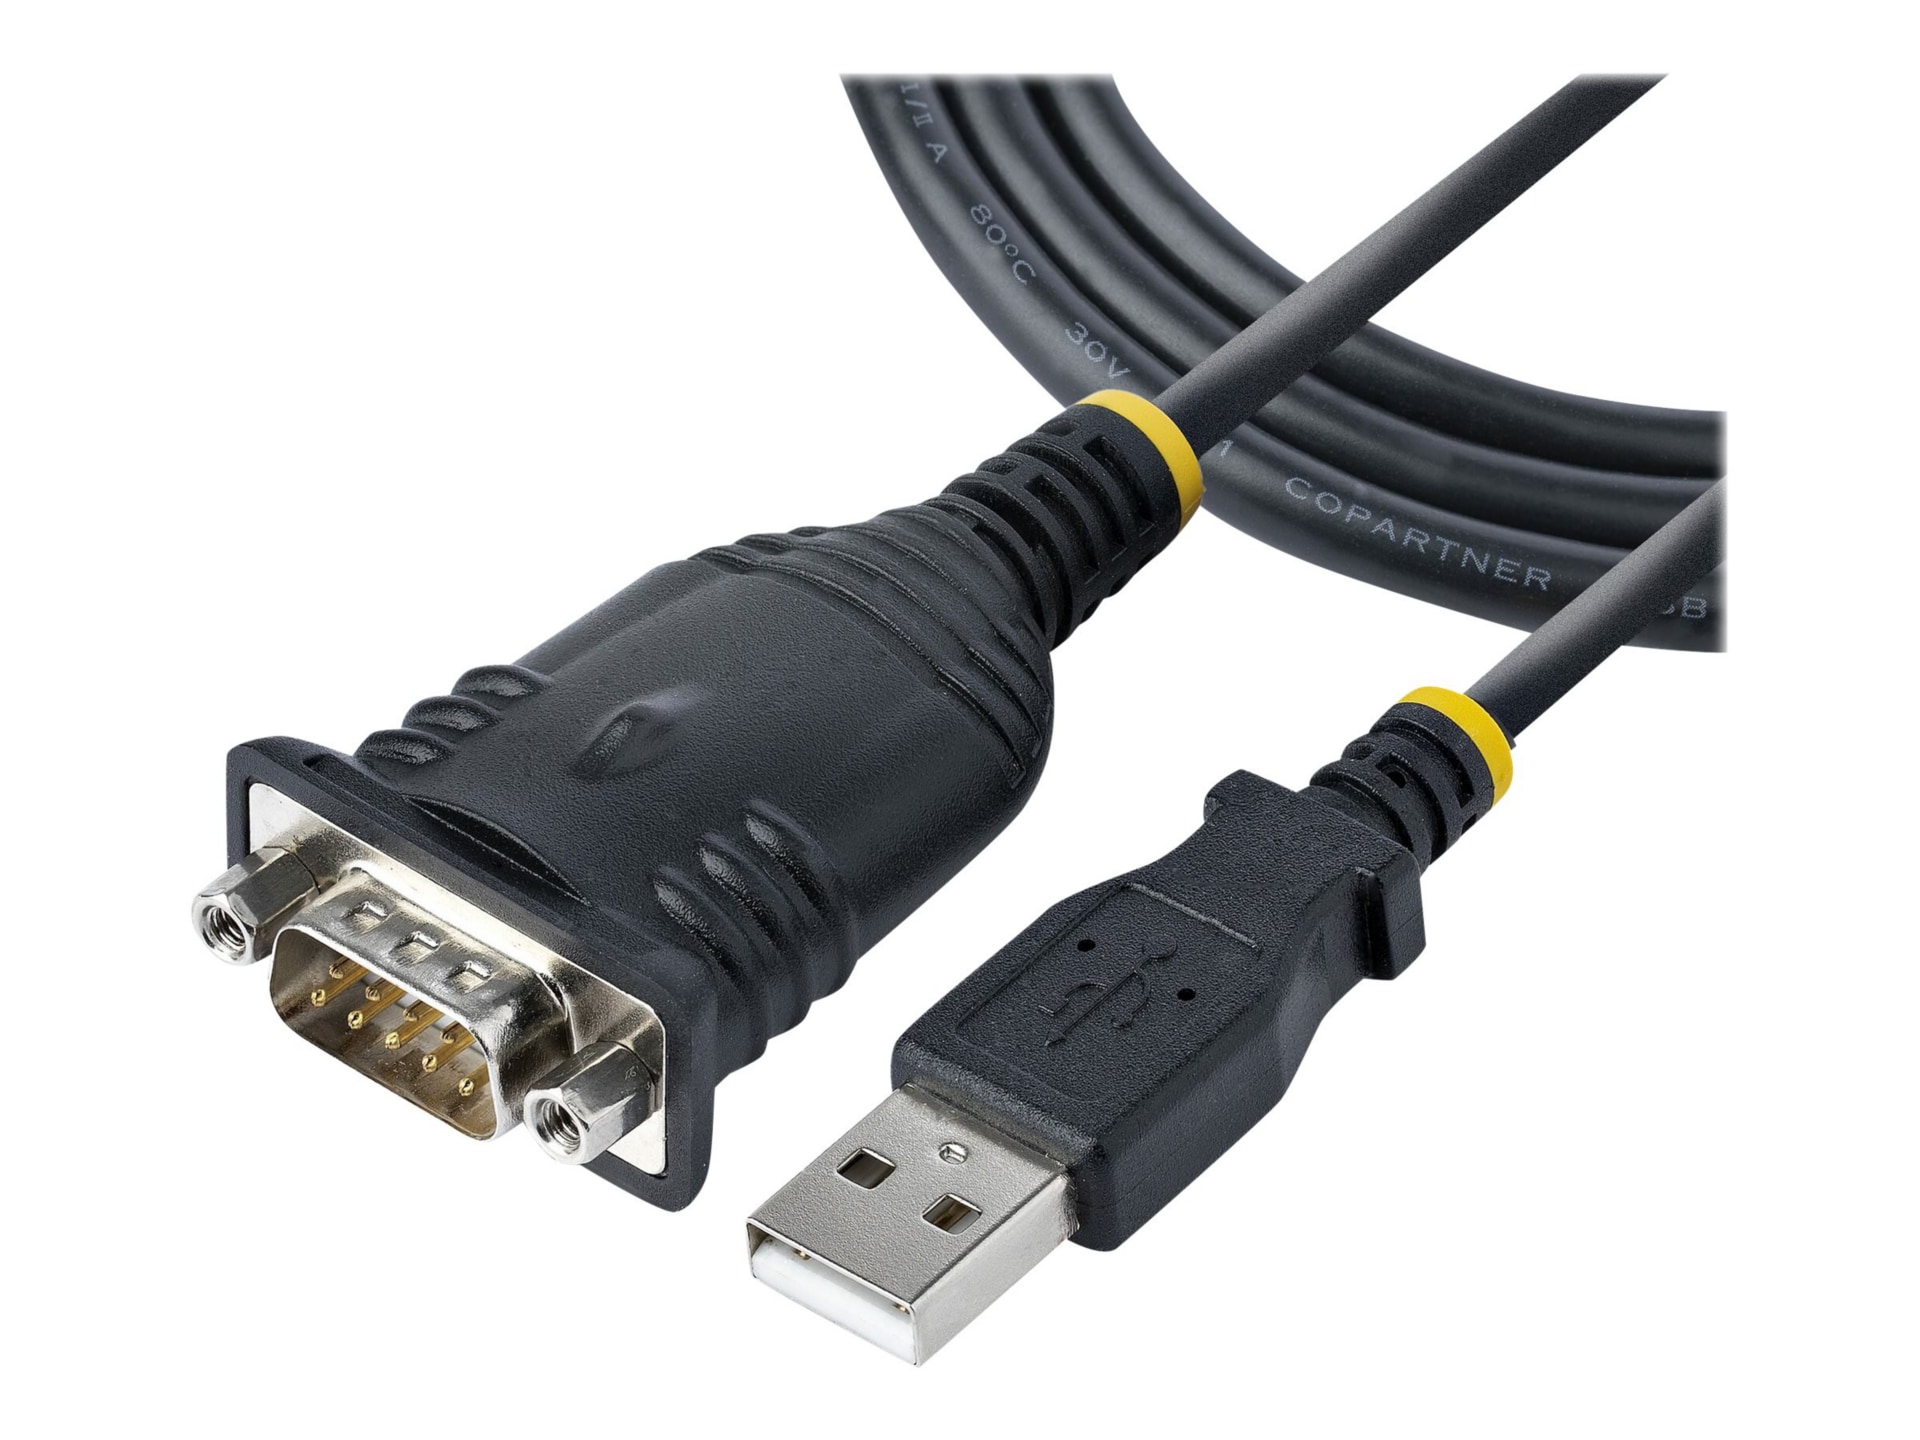 StarTech.com 3ft (1m) USB to Serial Cable, DB9 Male RS232 to USB Converter, USB to Serial Adapter, COM Port Adapter with